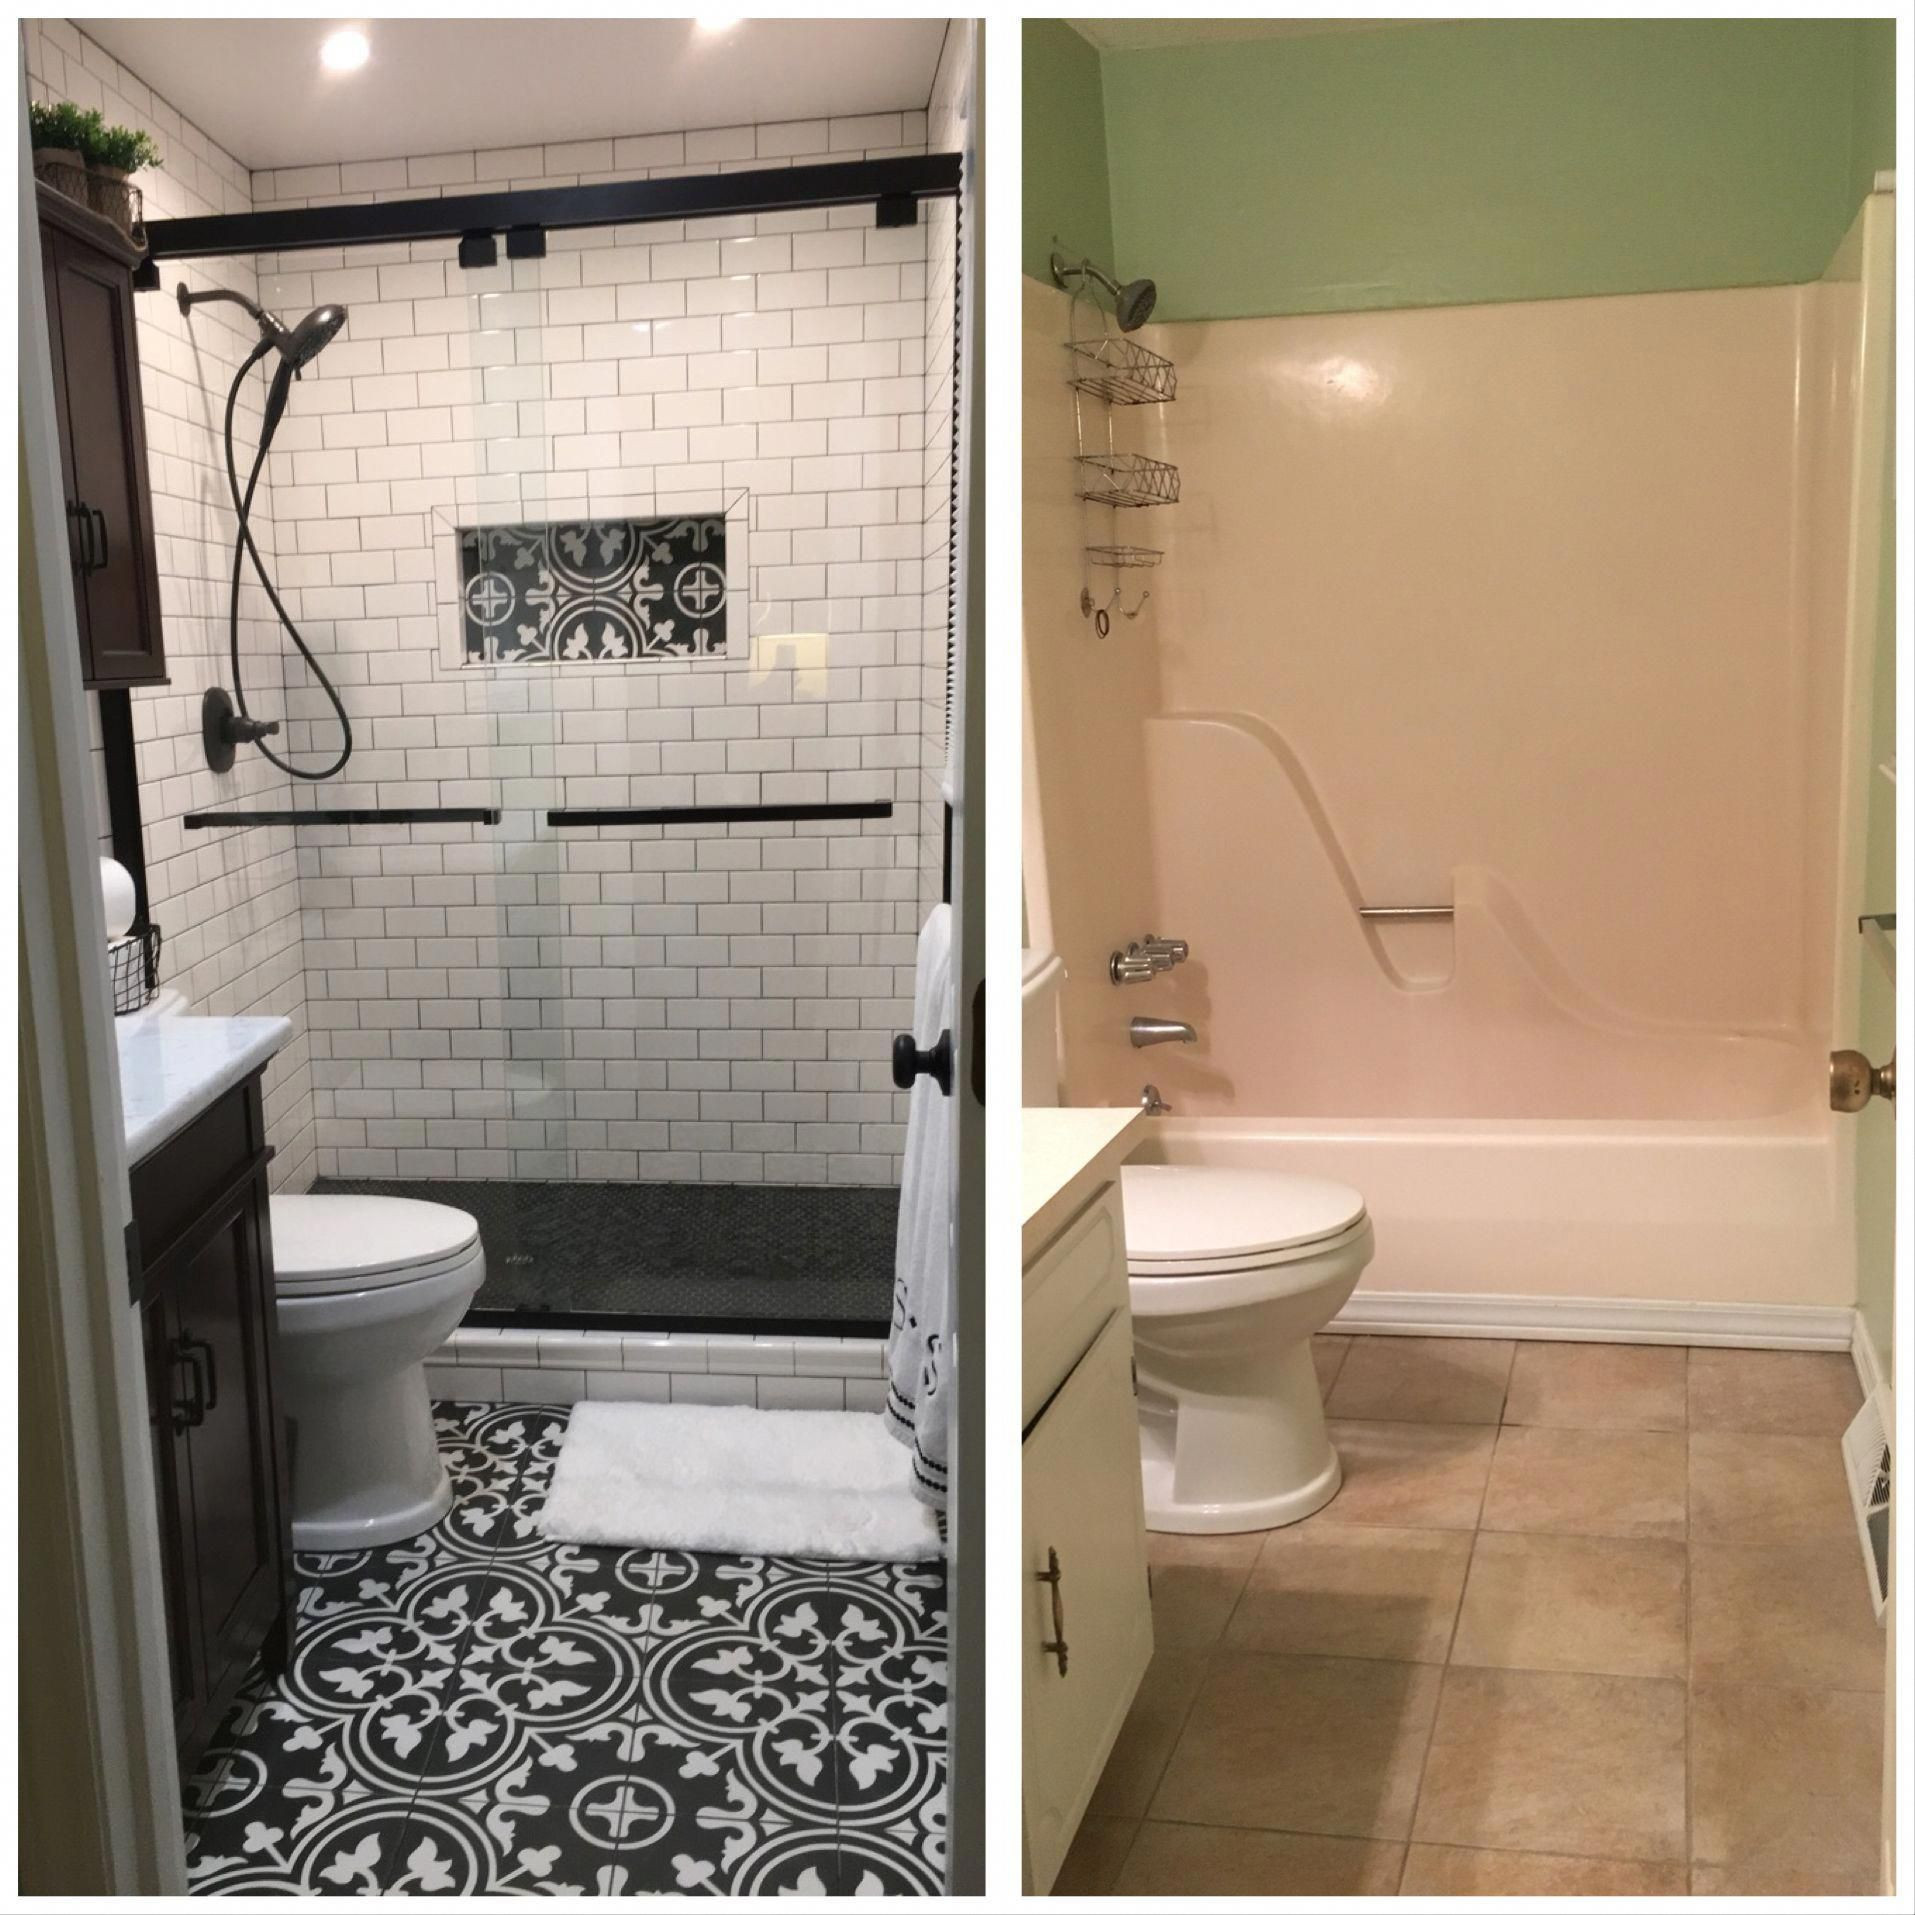 Bathroom Remodel Order
 Take a look at this important image in order to find out